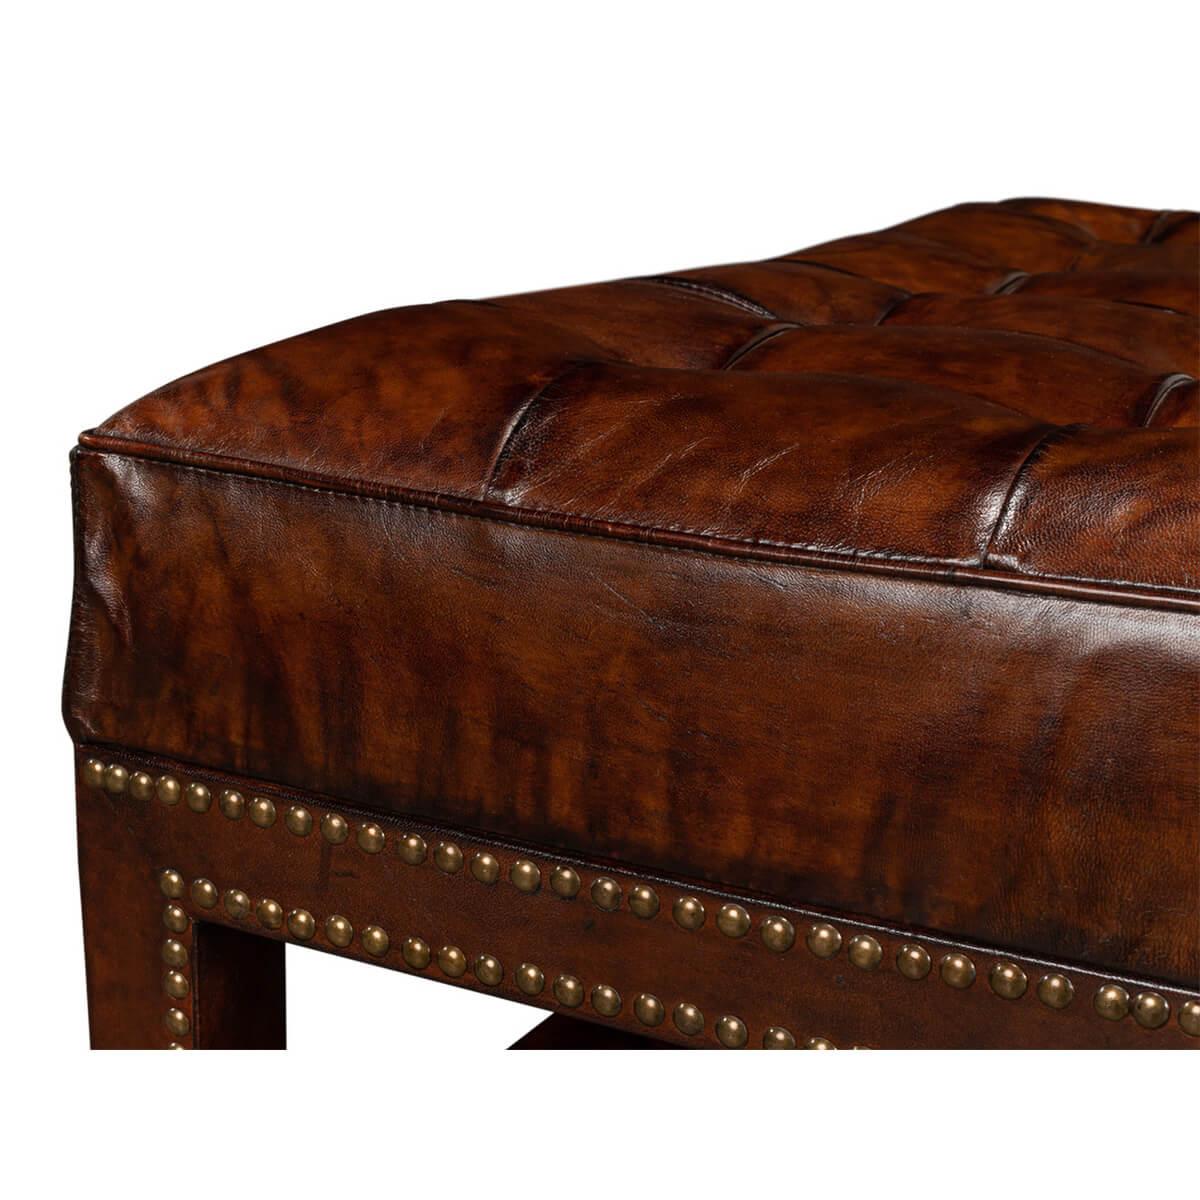 Contemporary Vintage-Style Tufted Leather Ottoman For Sale